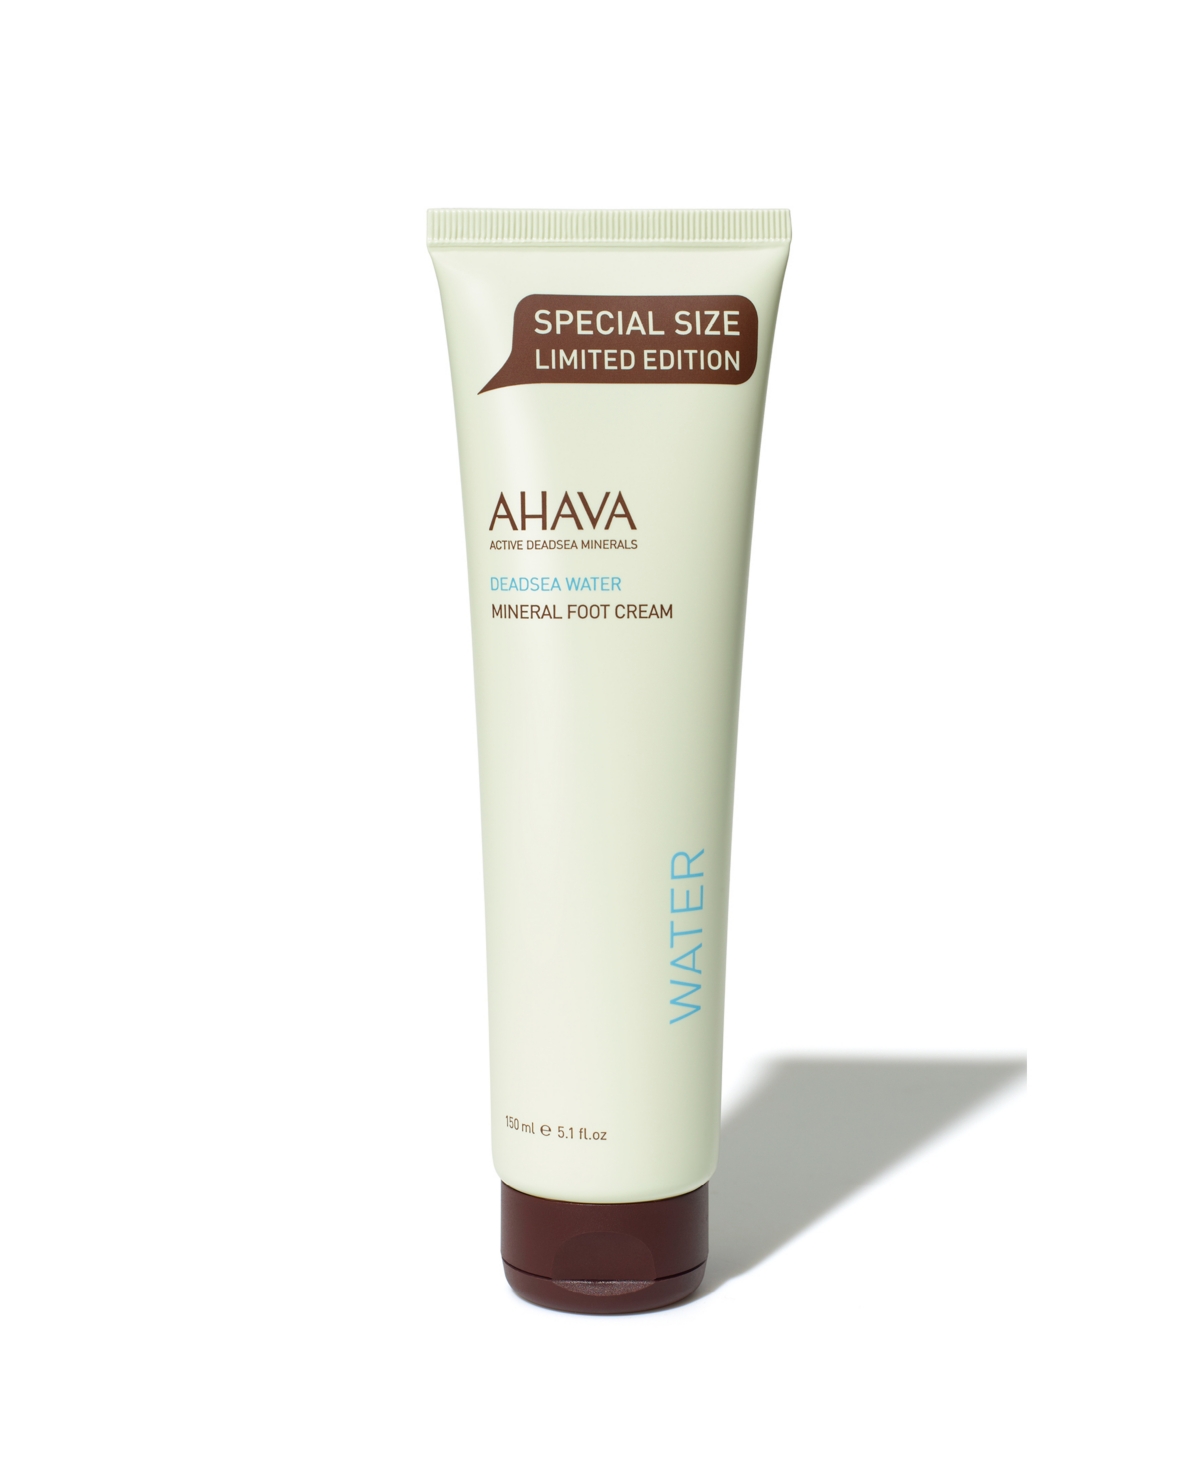 Ahava Mineral Foot Cream Special Size Limited Edition, 5.1 oz